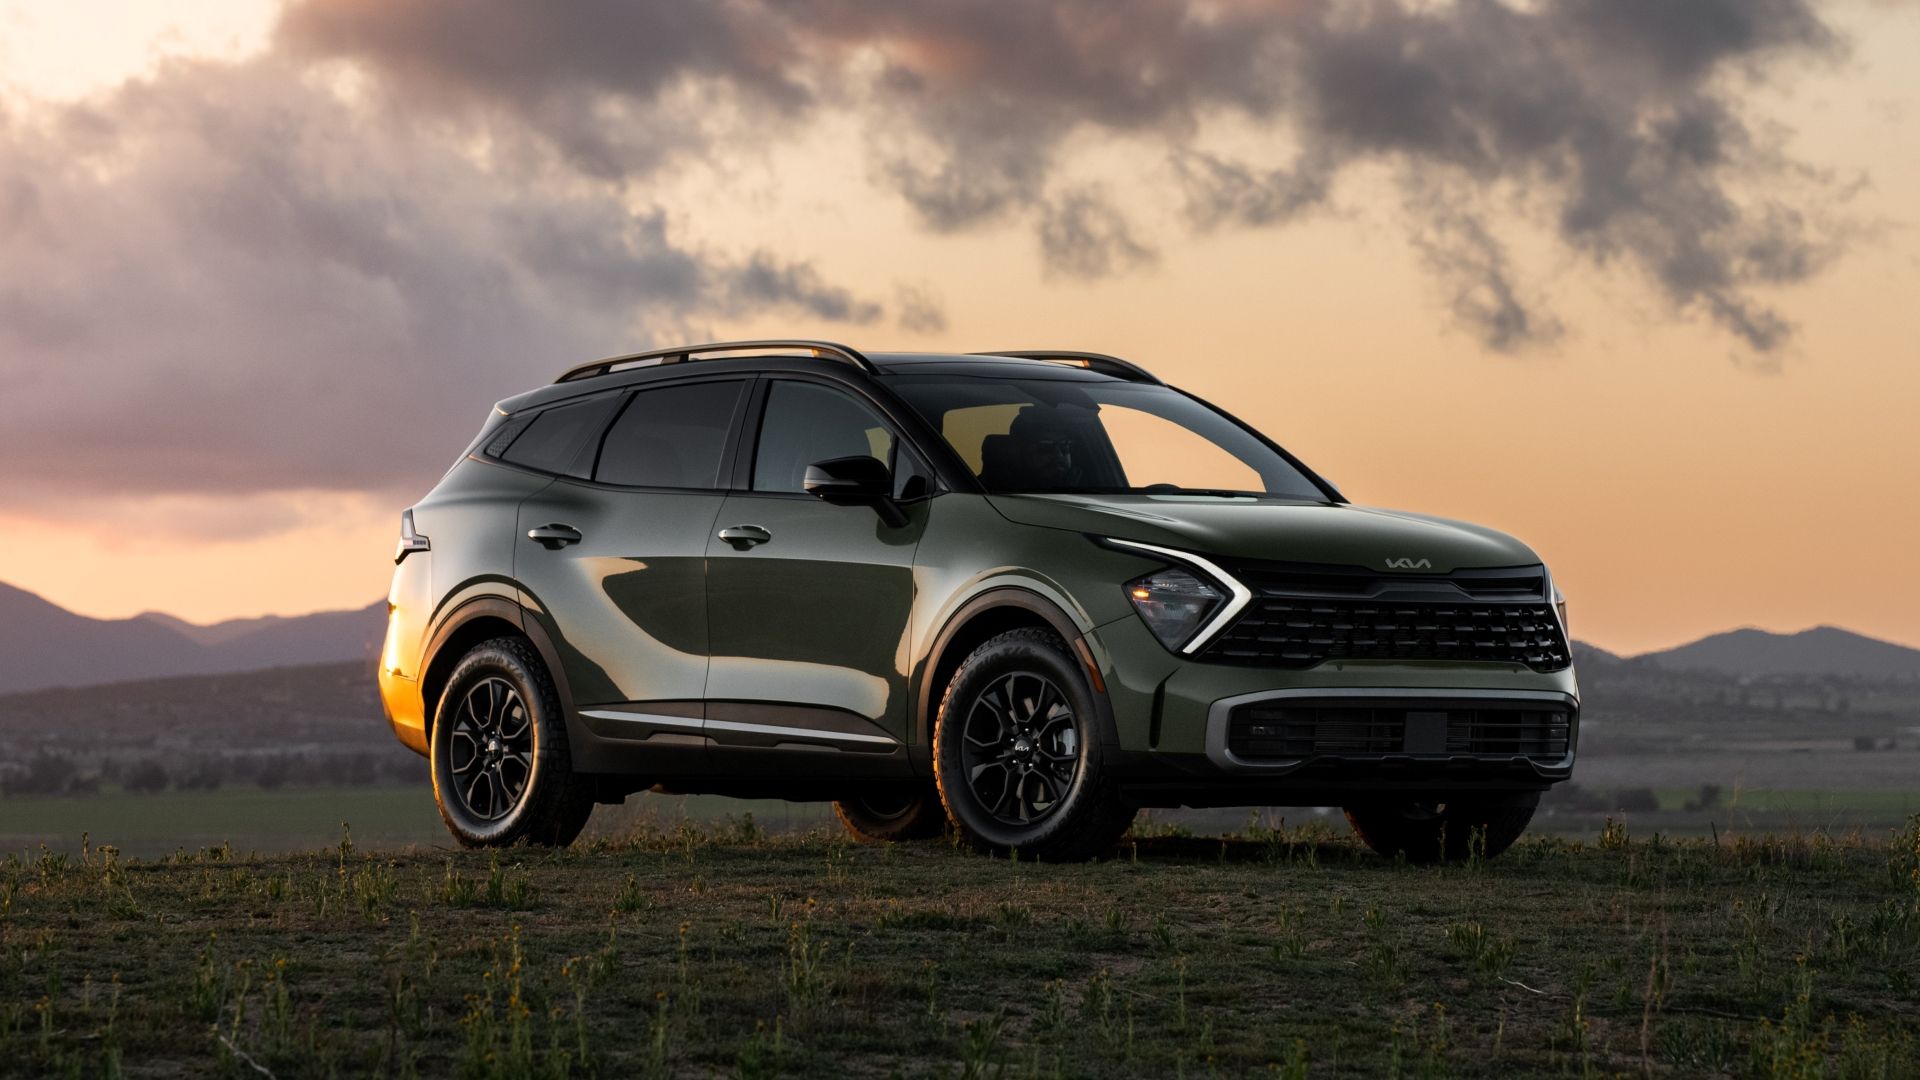 2024 Kia SUV Lineup Models, Pricing, Features, And Performance